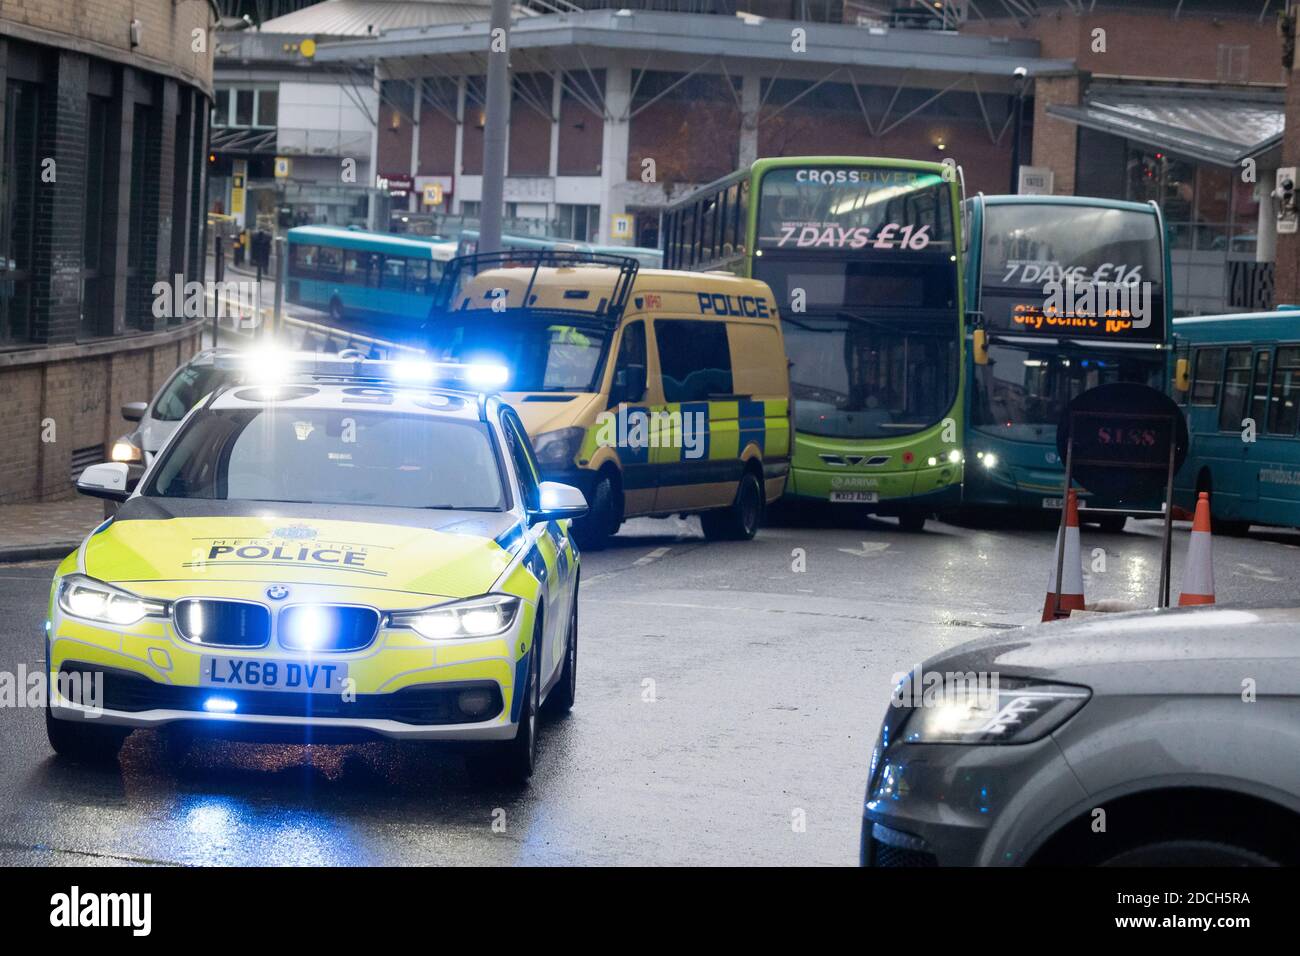 Liverpool, UK. 21st Nov 2020. Protesters gather in Liverpool City Centre and march through the streets to show their dissatisfaction with UK lockdown measures and government response to COVID-19. Tensions rise as protesters clash with police. Credit: Callum Fraser/Alamy Live News Stock Photo